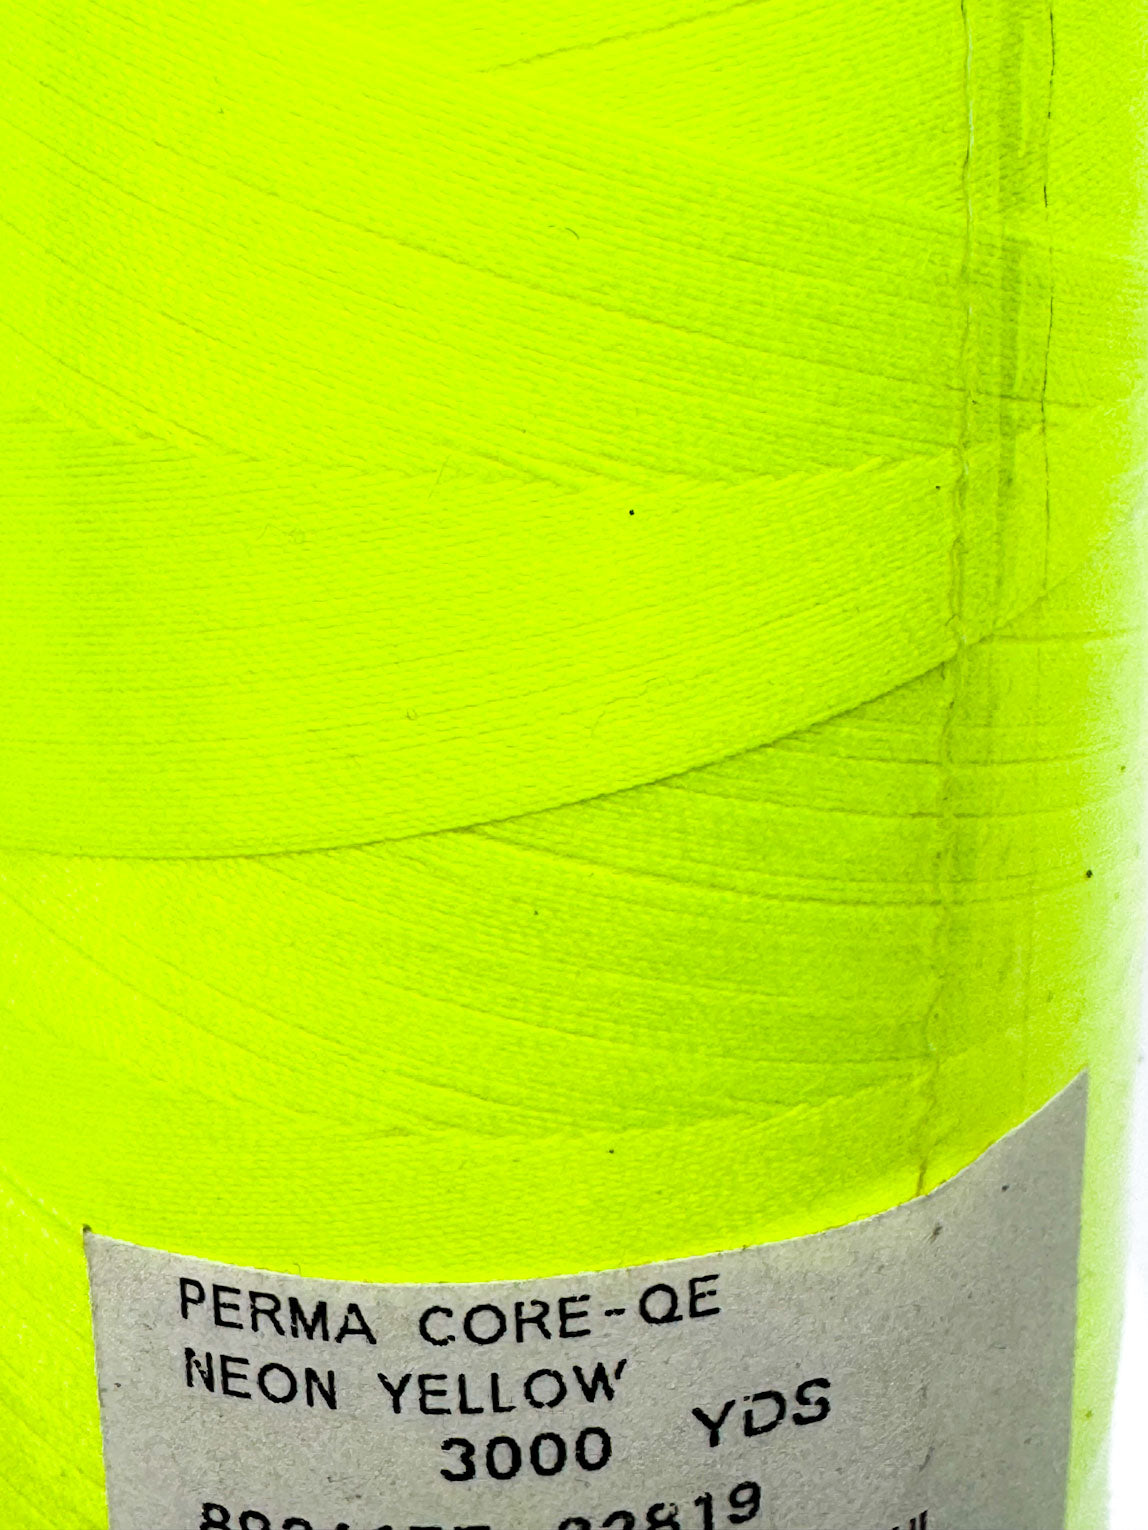 Perma Core Quilter's Edition Thread 3000 yard spools